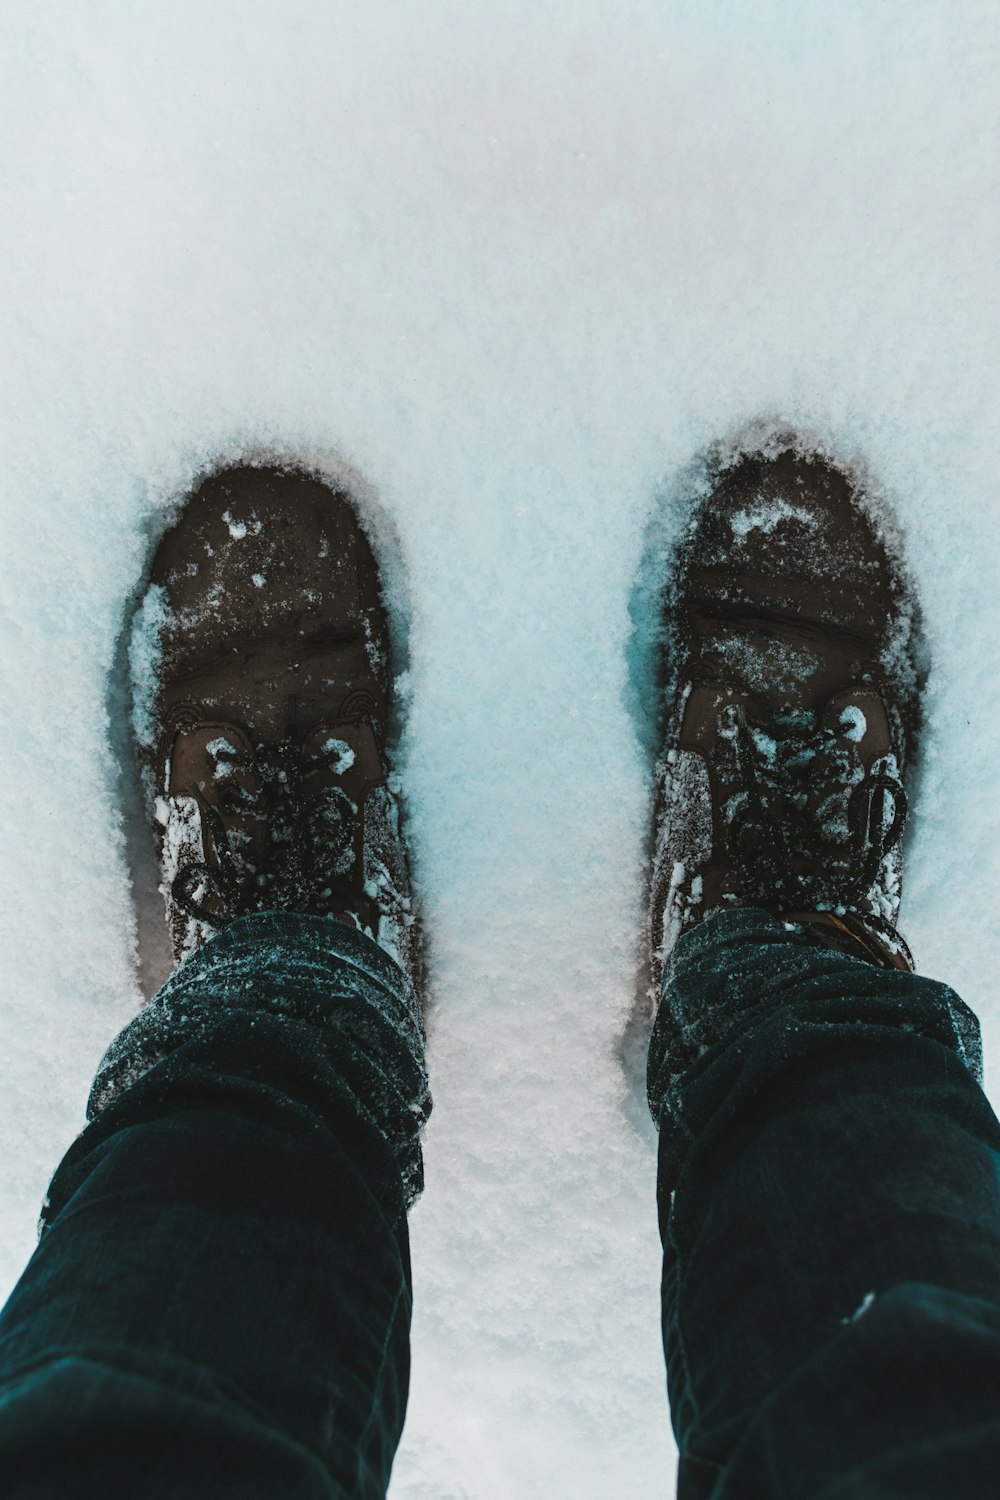 person in black pants and black shoes standing on snow covered ground